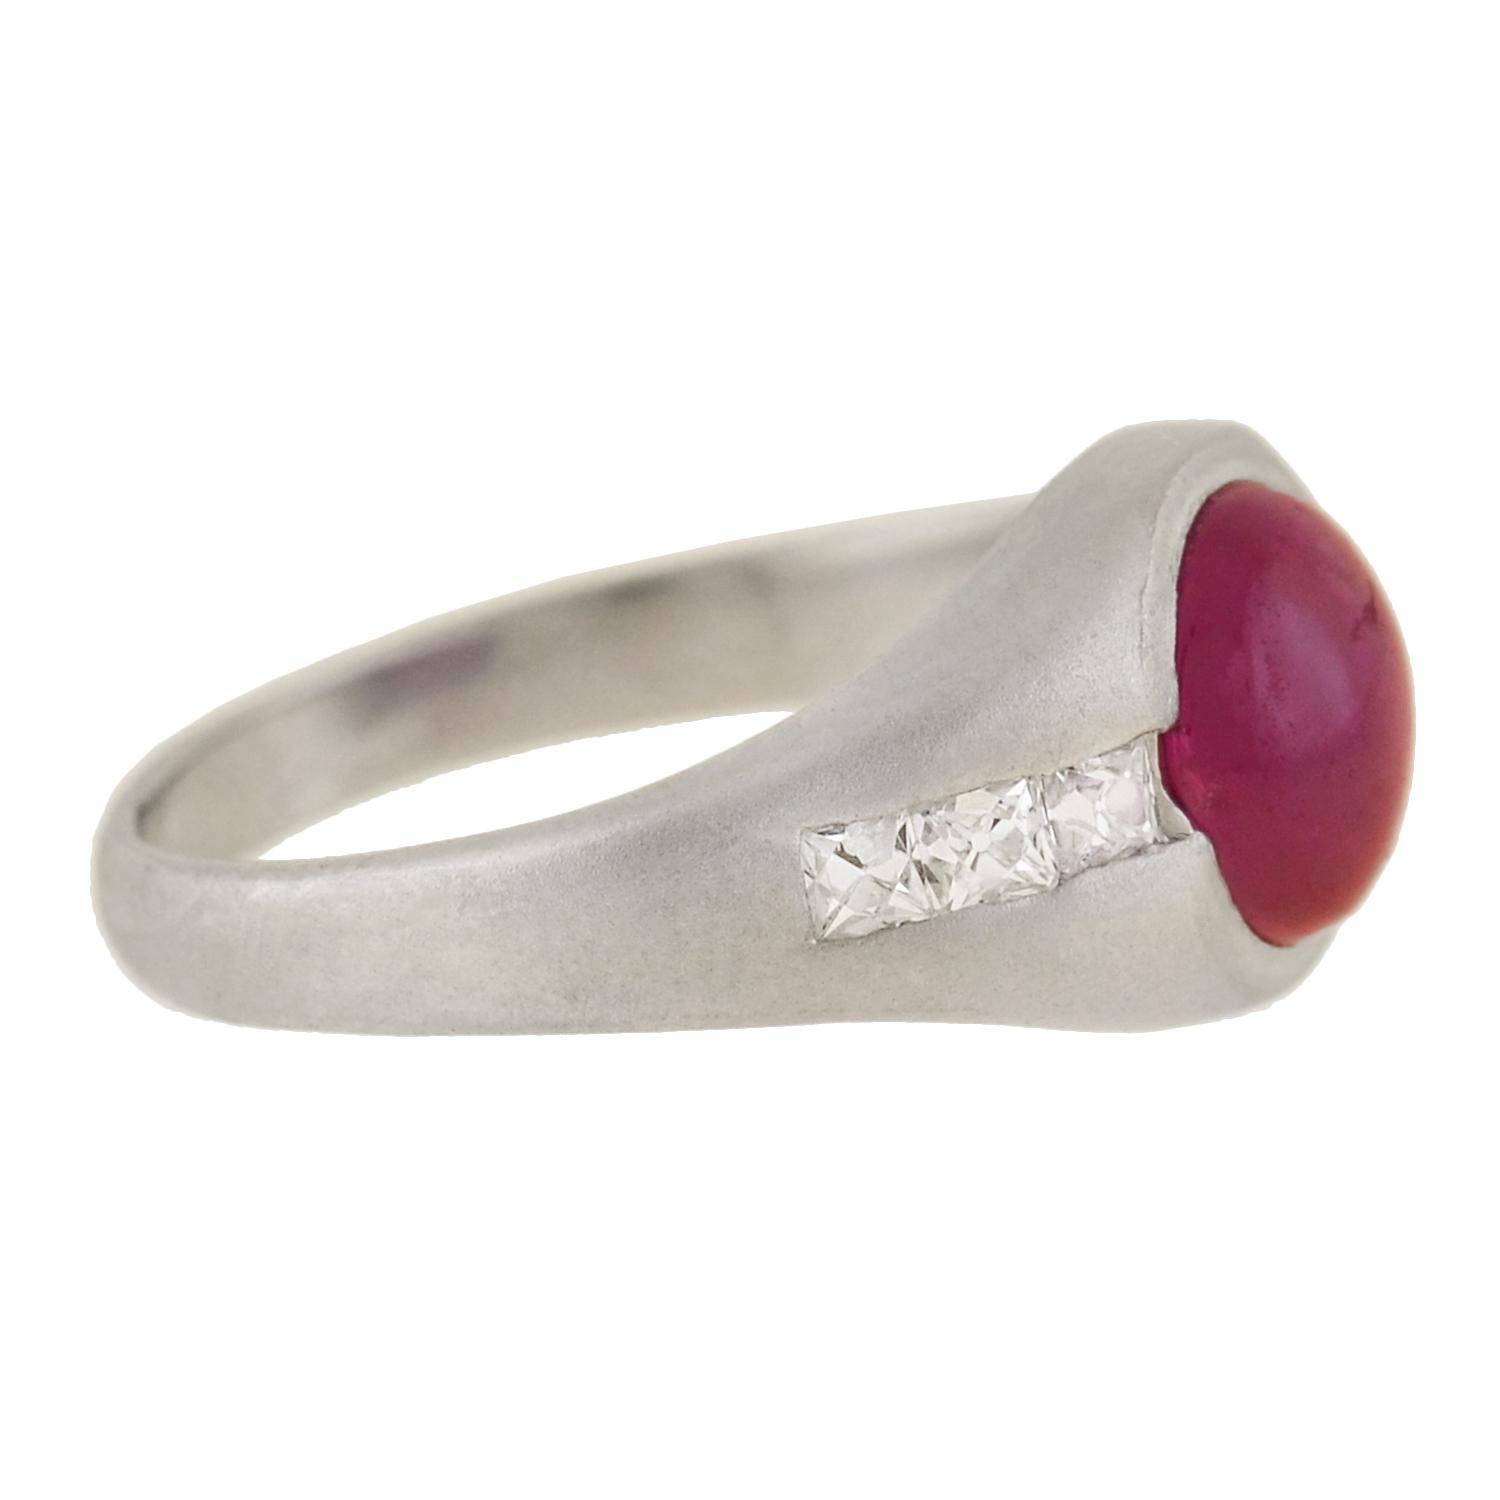 A gorgeous ruby and diamond ring from the Edwardian (ca1910) era! Crafted in platinum, this stylish piece features a stunning Burmese ruby cabochon at the center. The luscious stone displays a natural raspberry red color, and is nestled between a